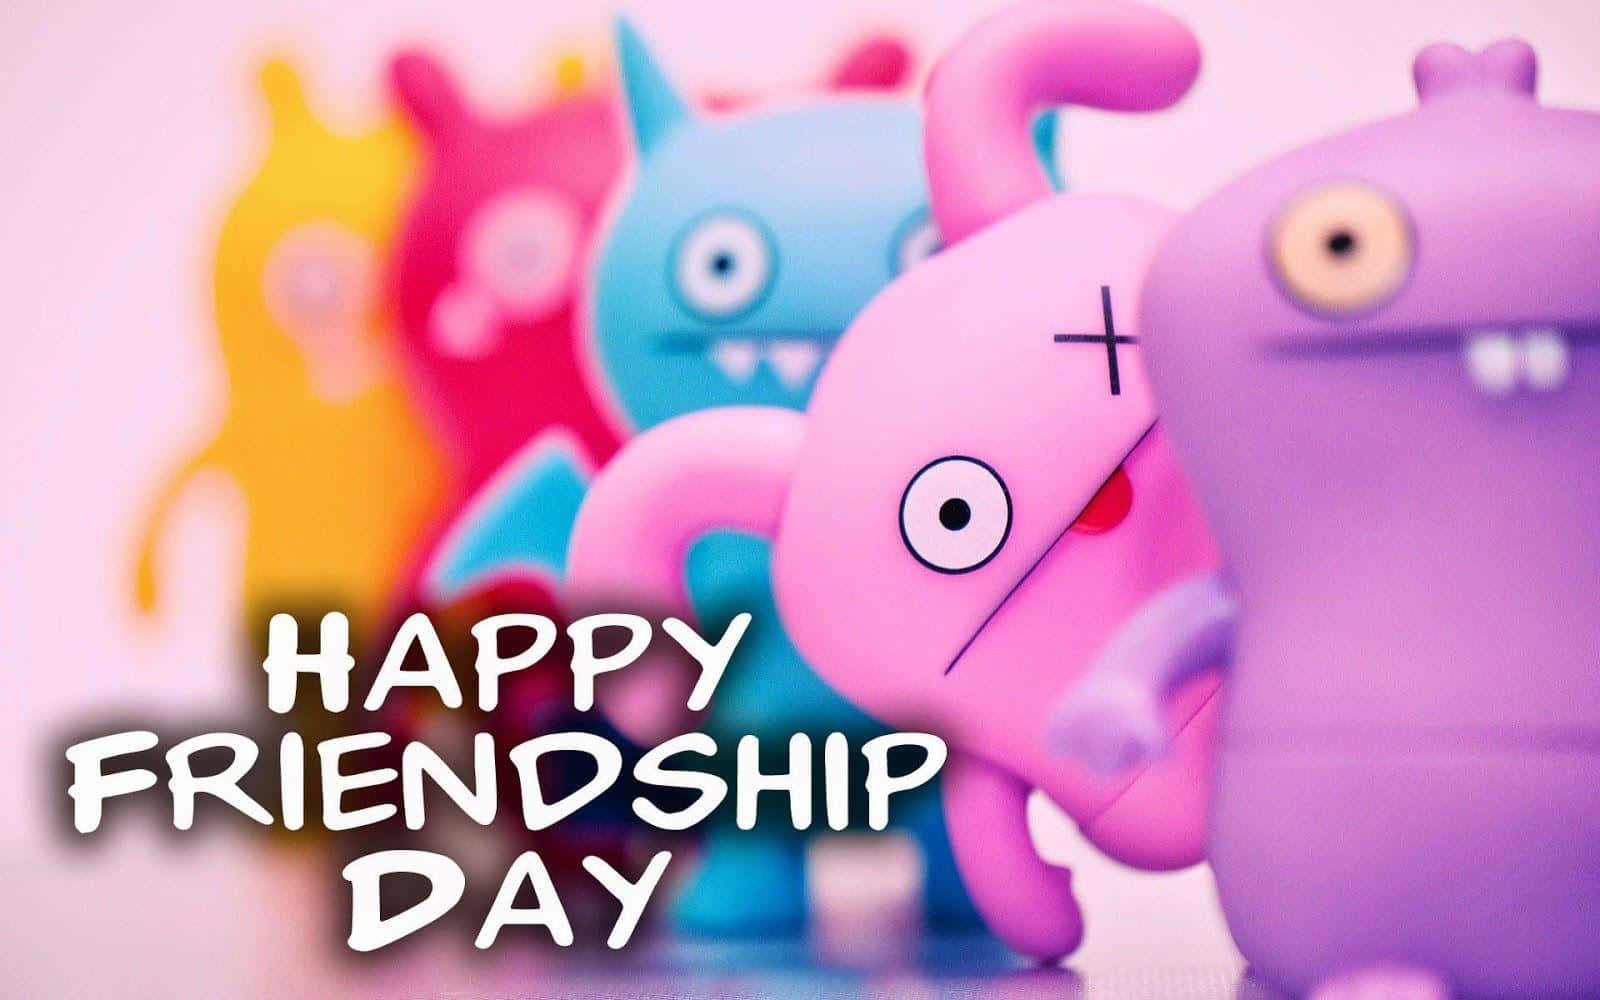 Friends Forever - Hand in Hand on Friendship Day